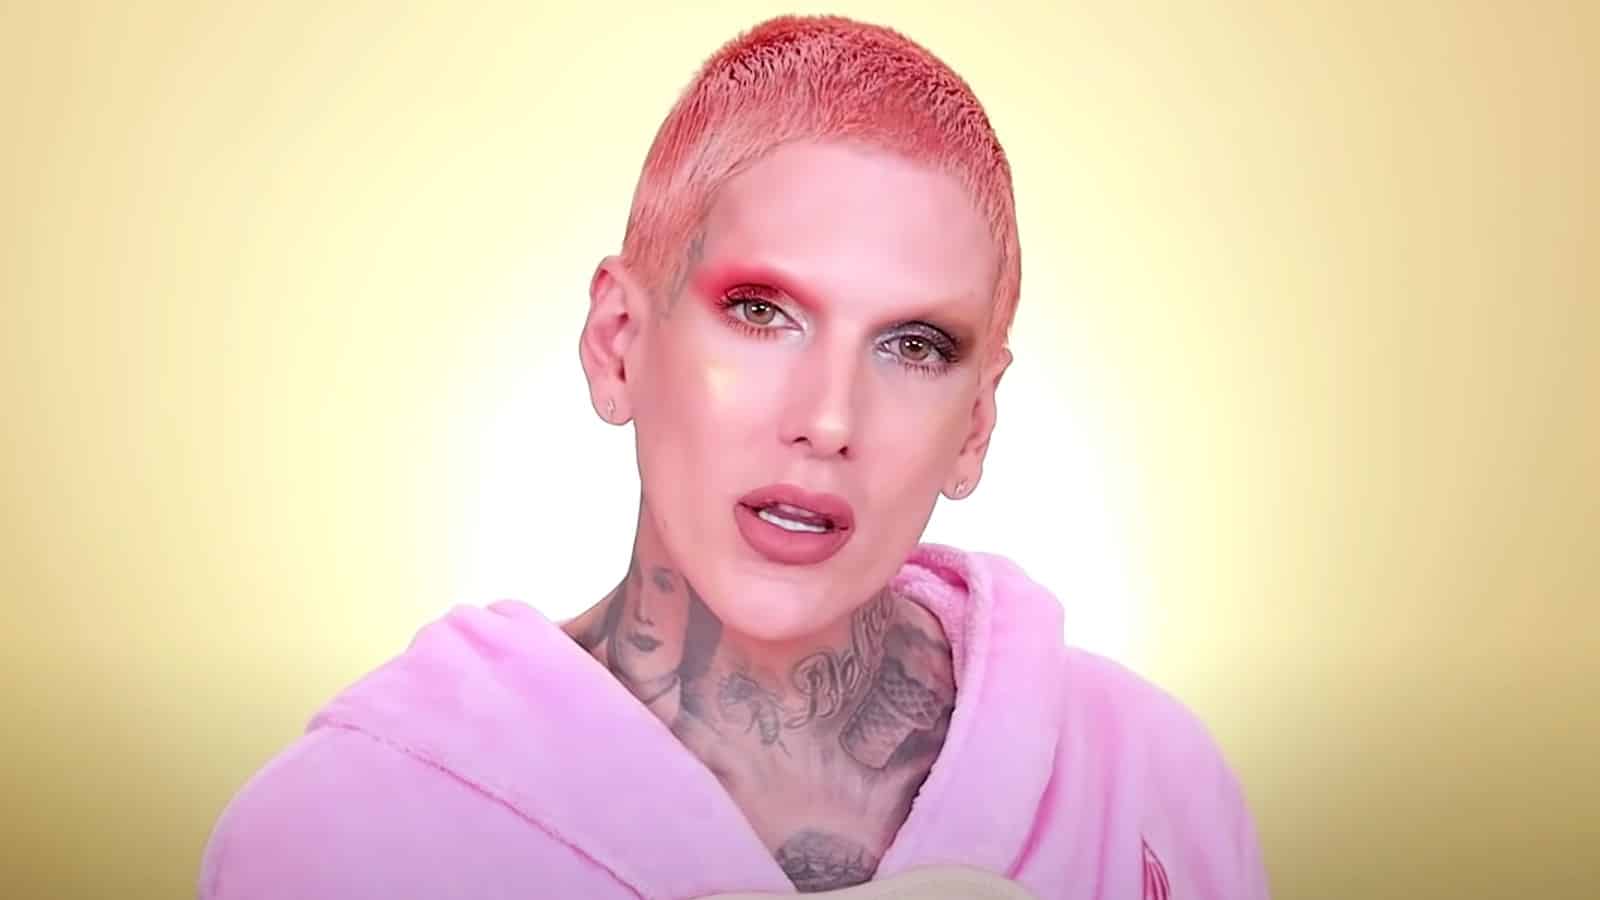 Trying The World's MOST Beautiful Makeup Is It Jeffree Star